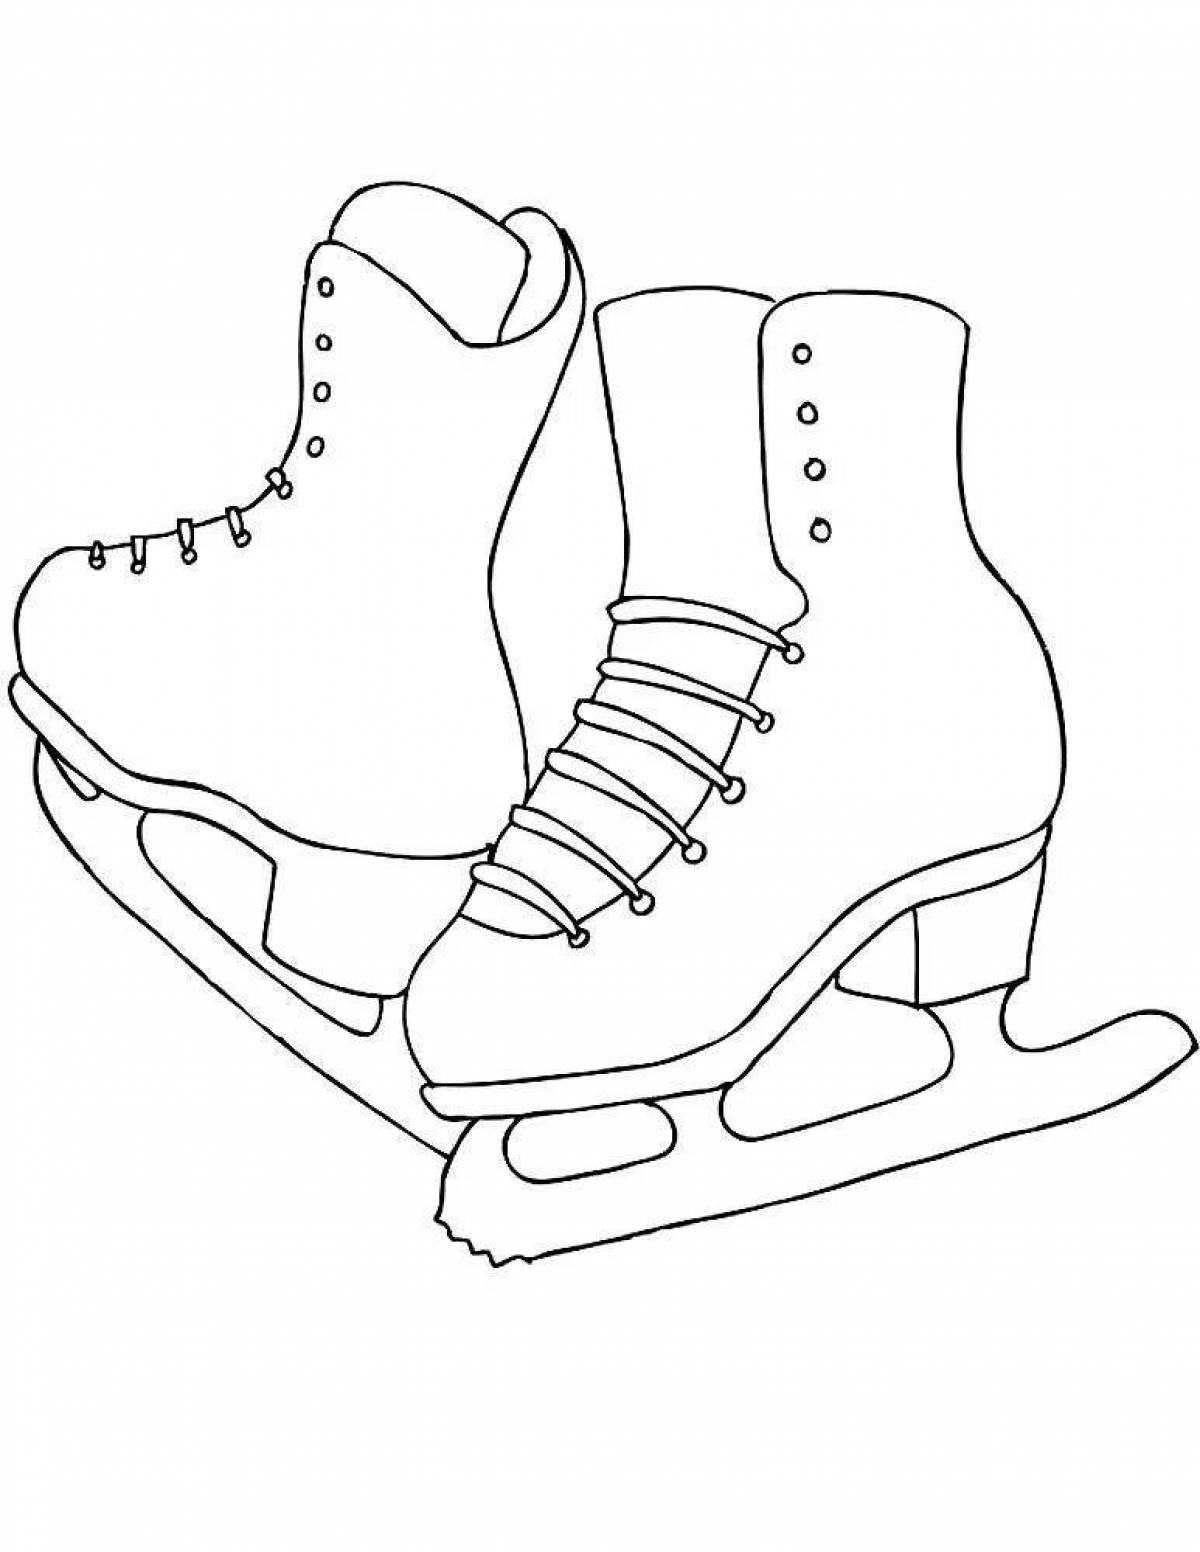 Coloring figure skates with colorful splashes